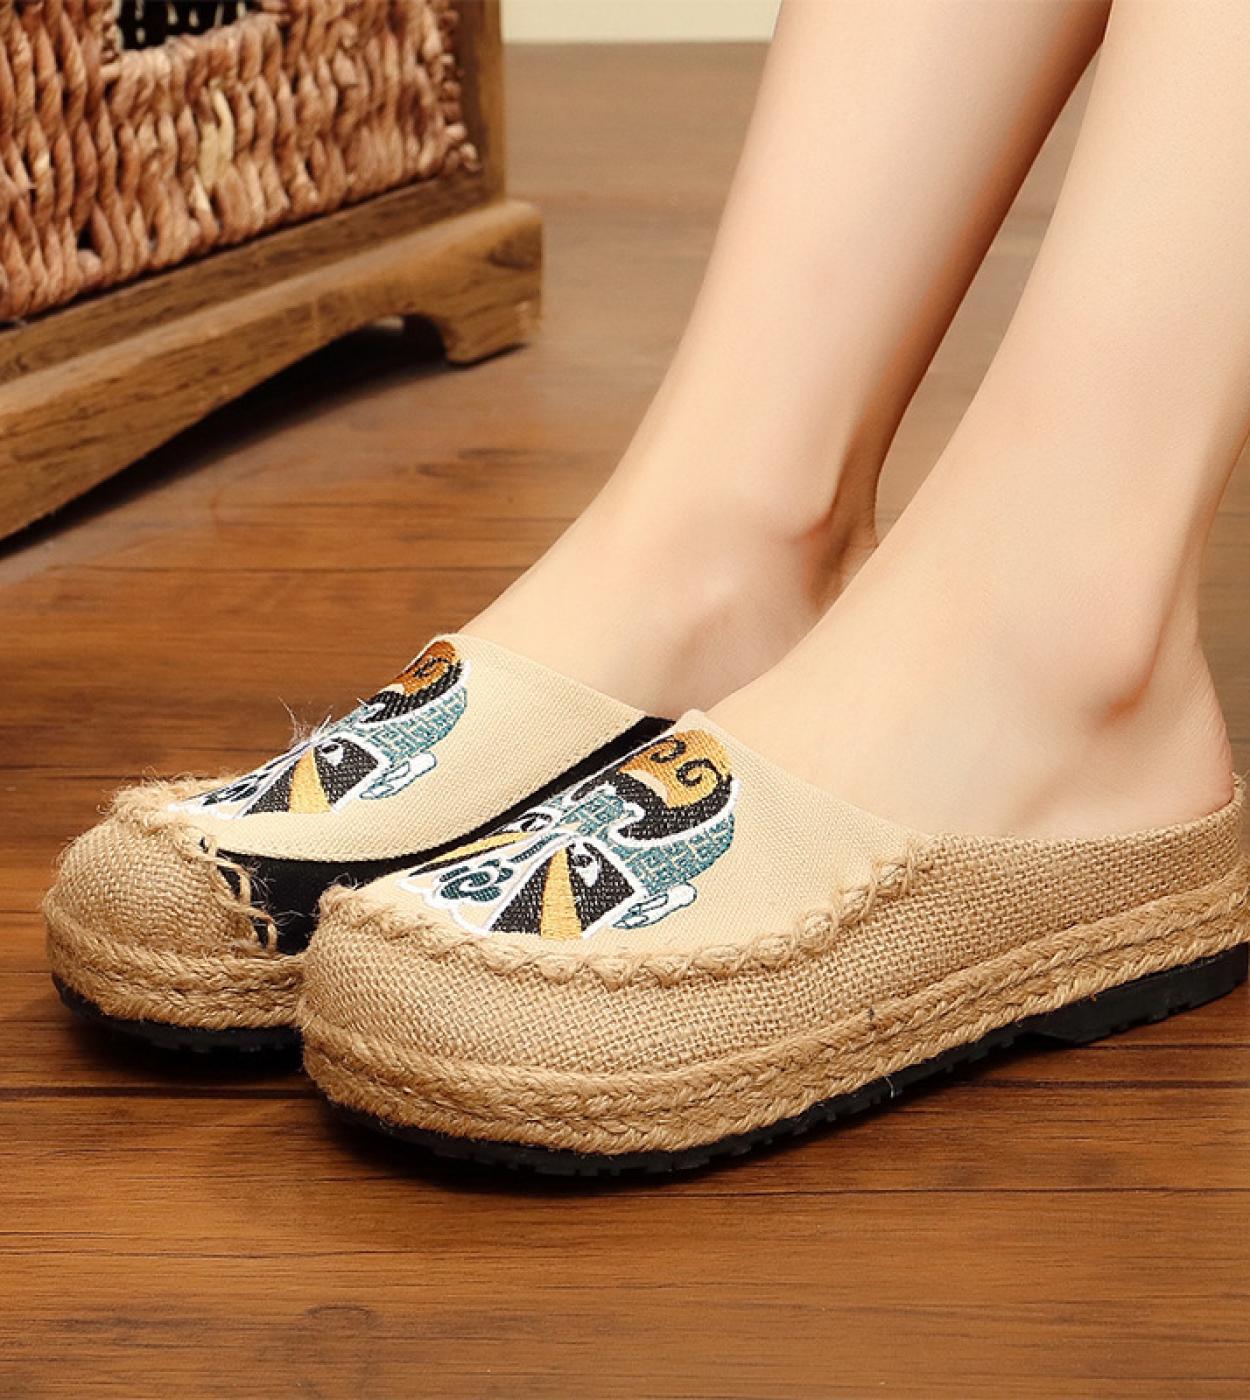 New Women Flax Beijing Opera Facebook Embroidery Slippers Retro Ethnic Handmade Weave Female Shoes Flat Casual Breathabl